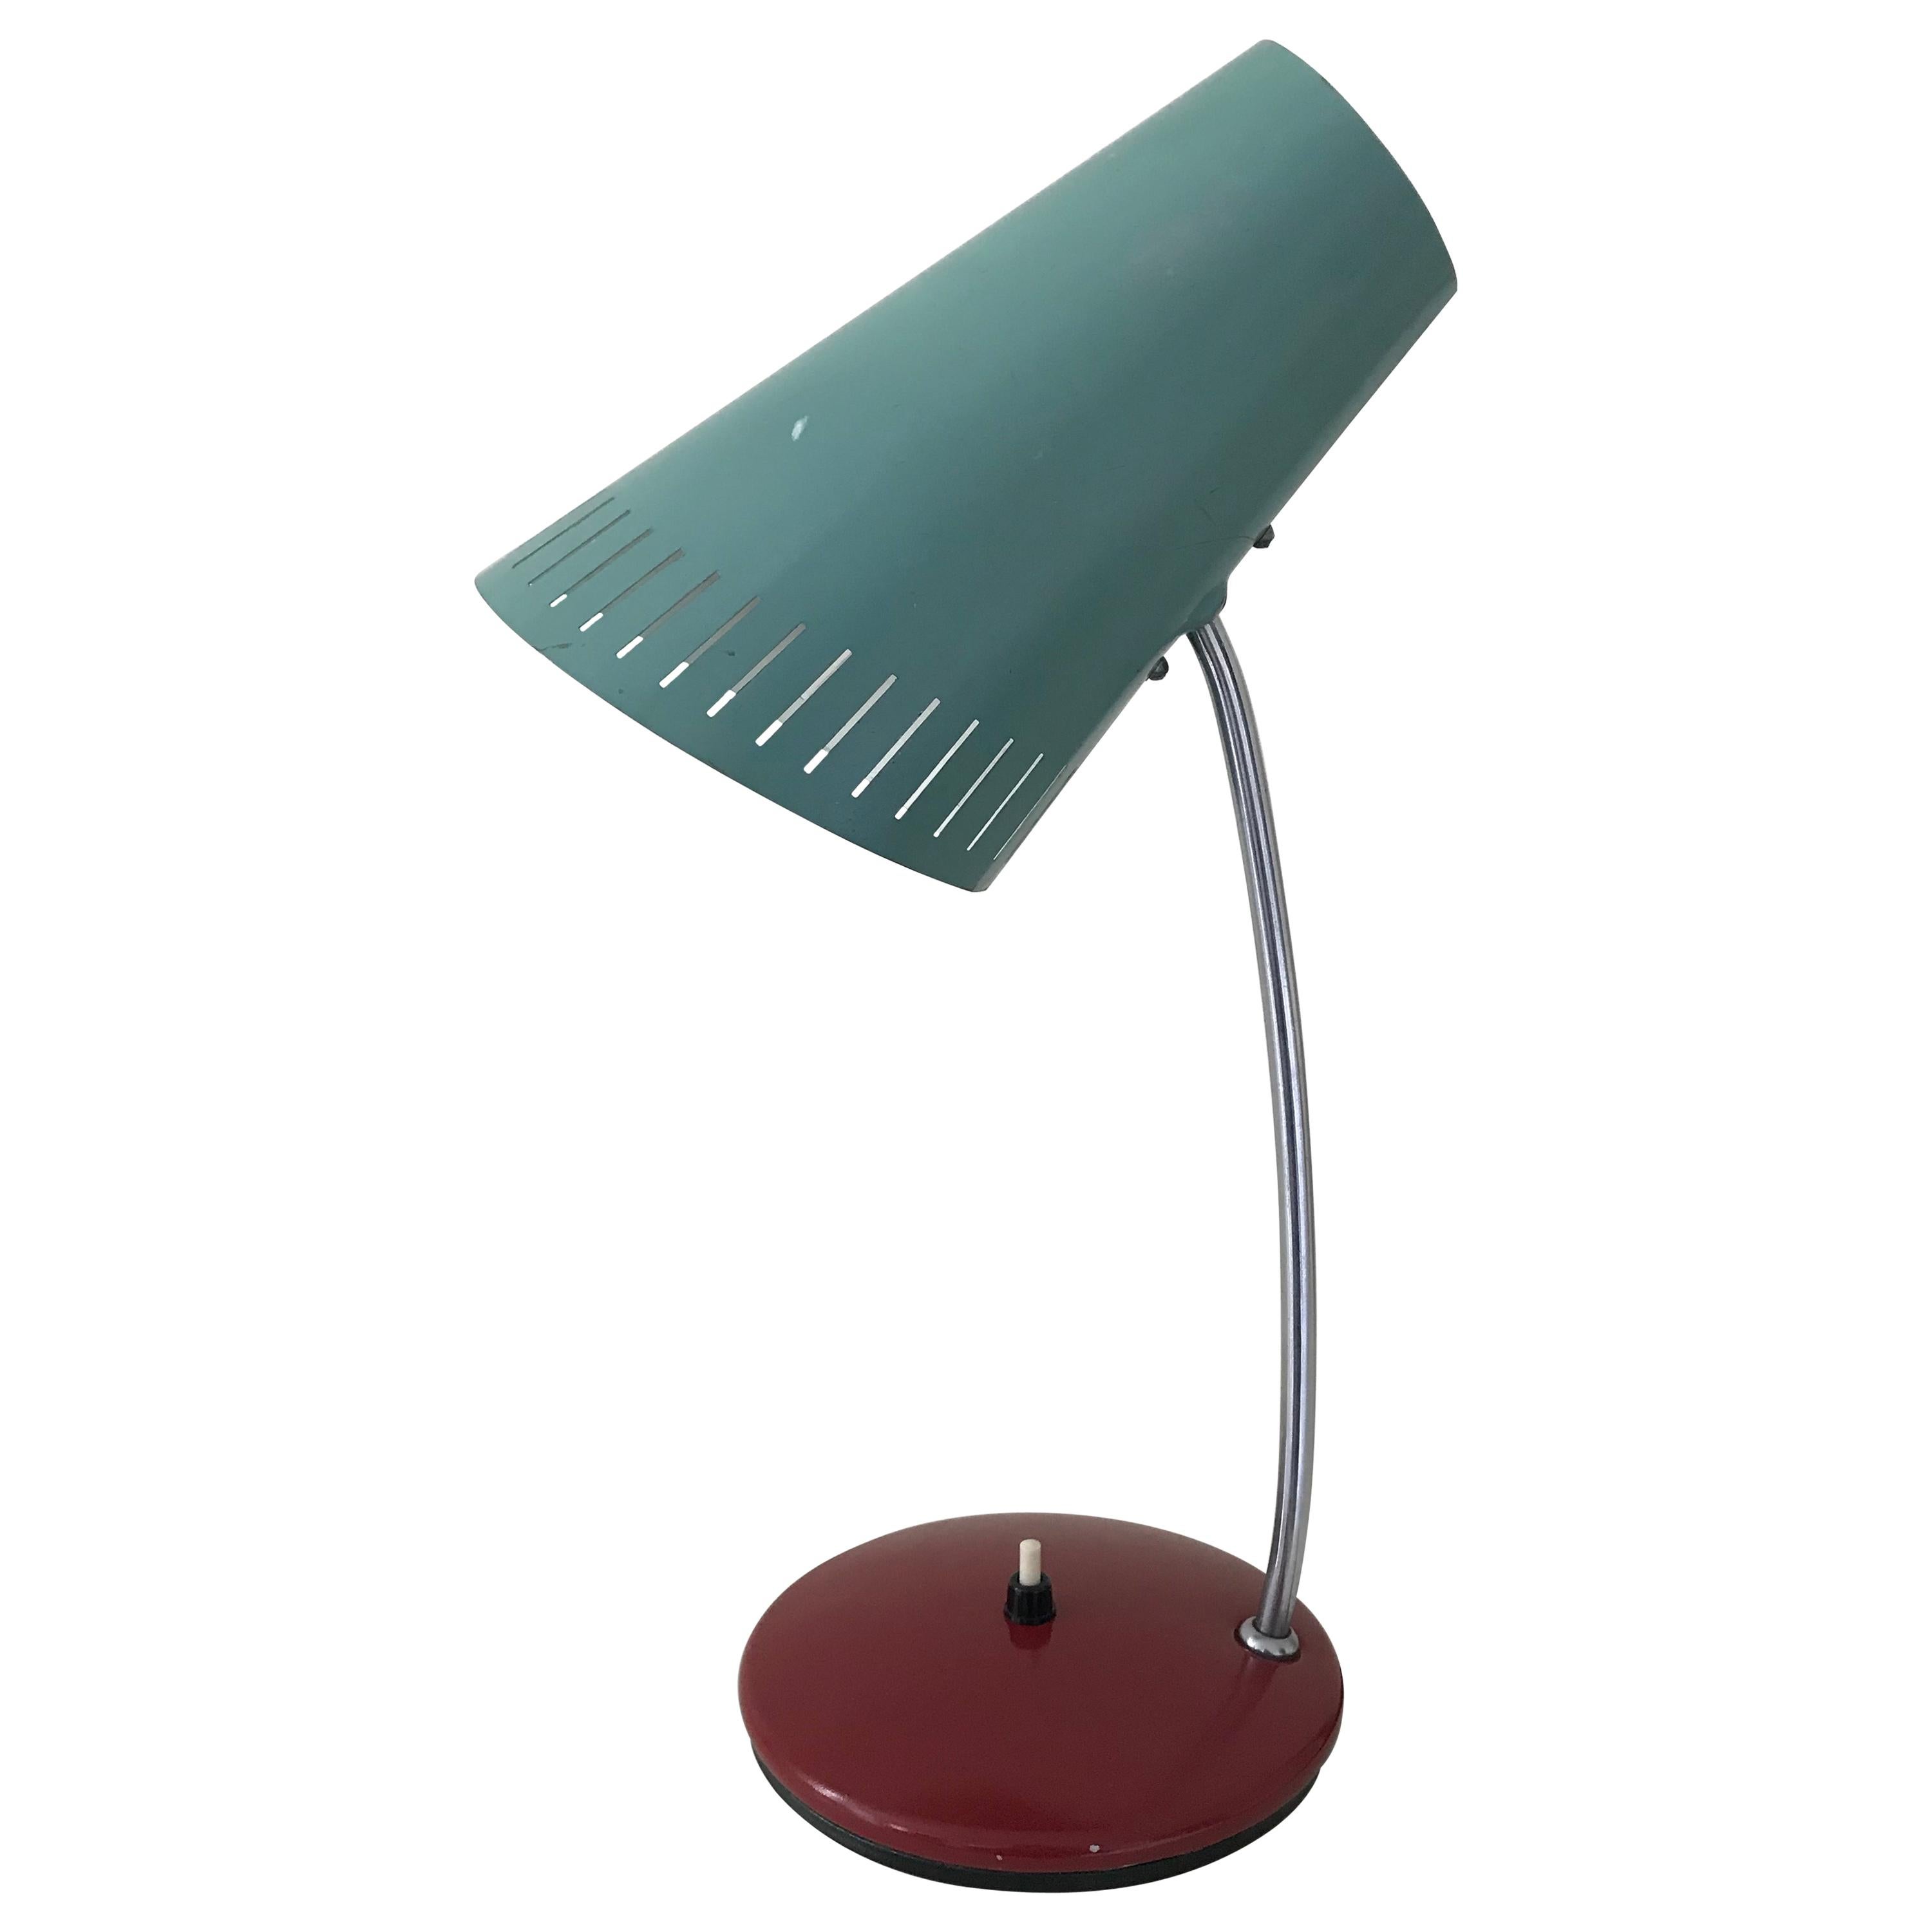 Mid-Century Modern Cone Shaped Desk Lamp, Turquoise and Red, Russia, 1966